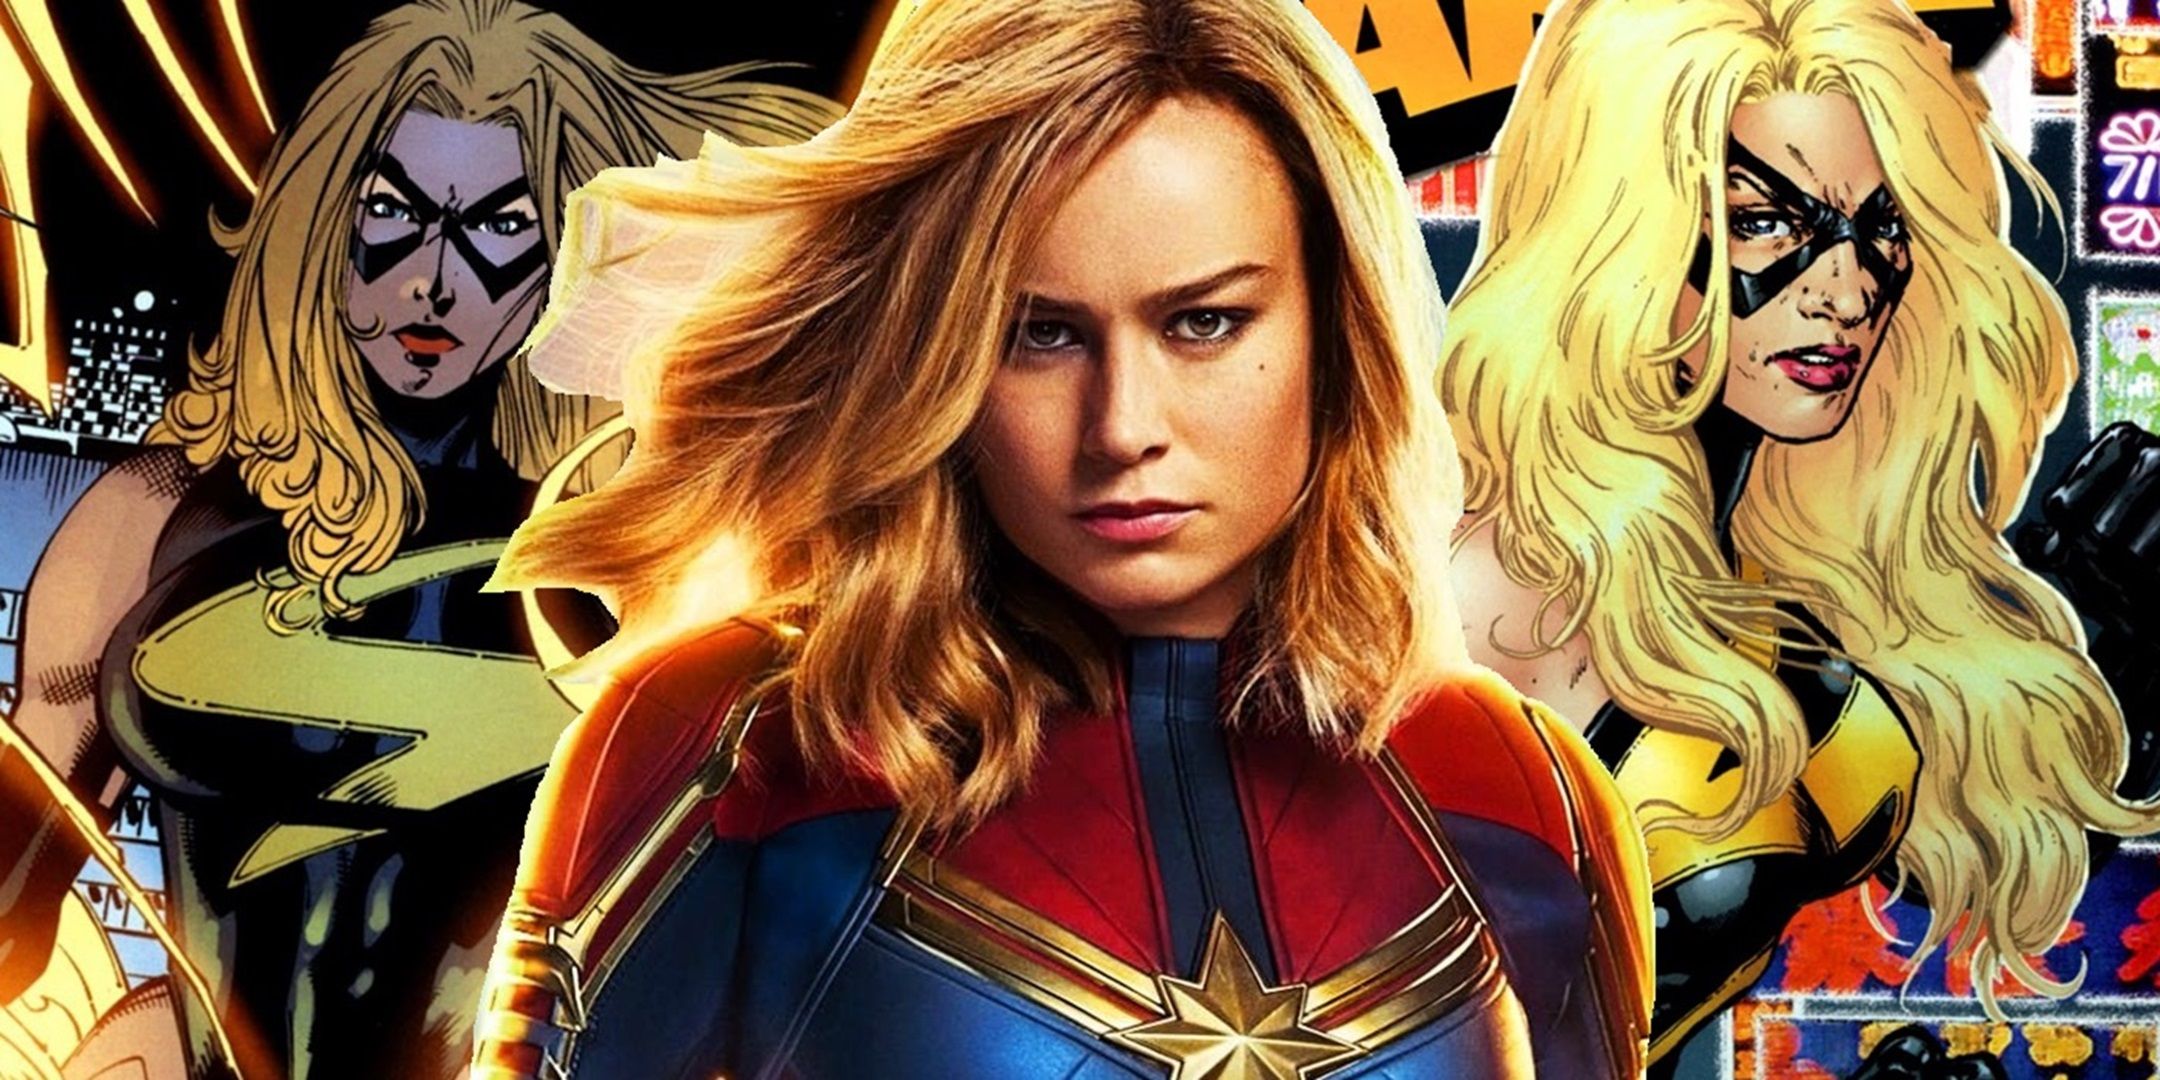 Carol Danvers in front images of herself at Ms. Marvel